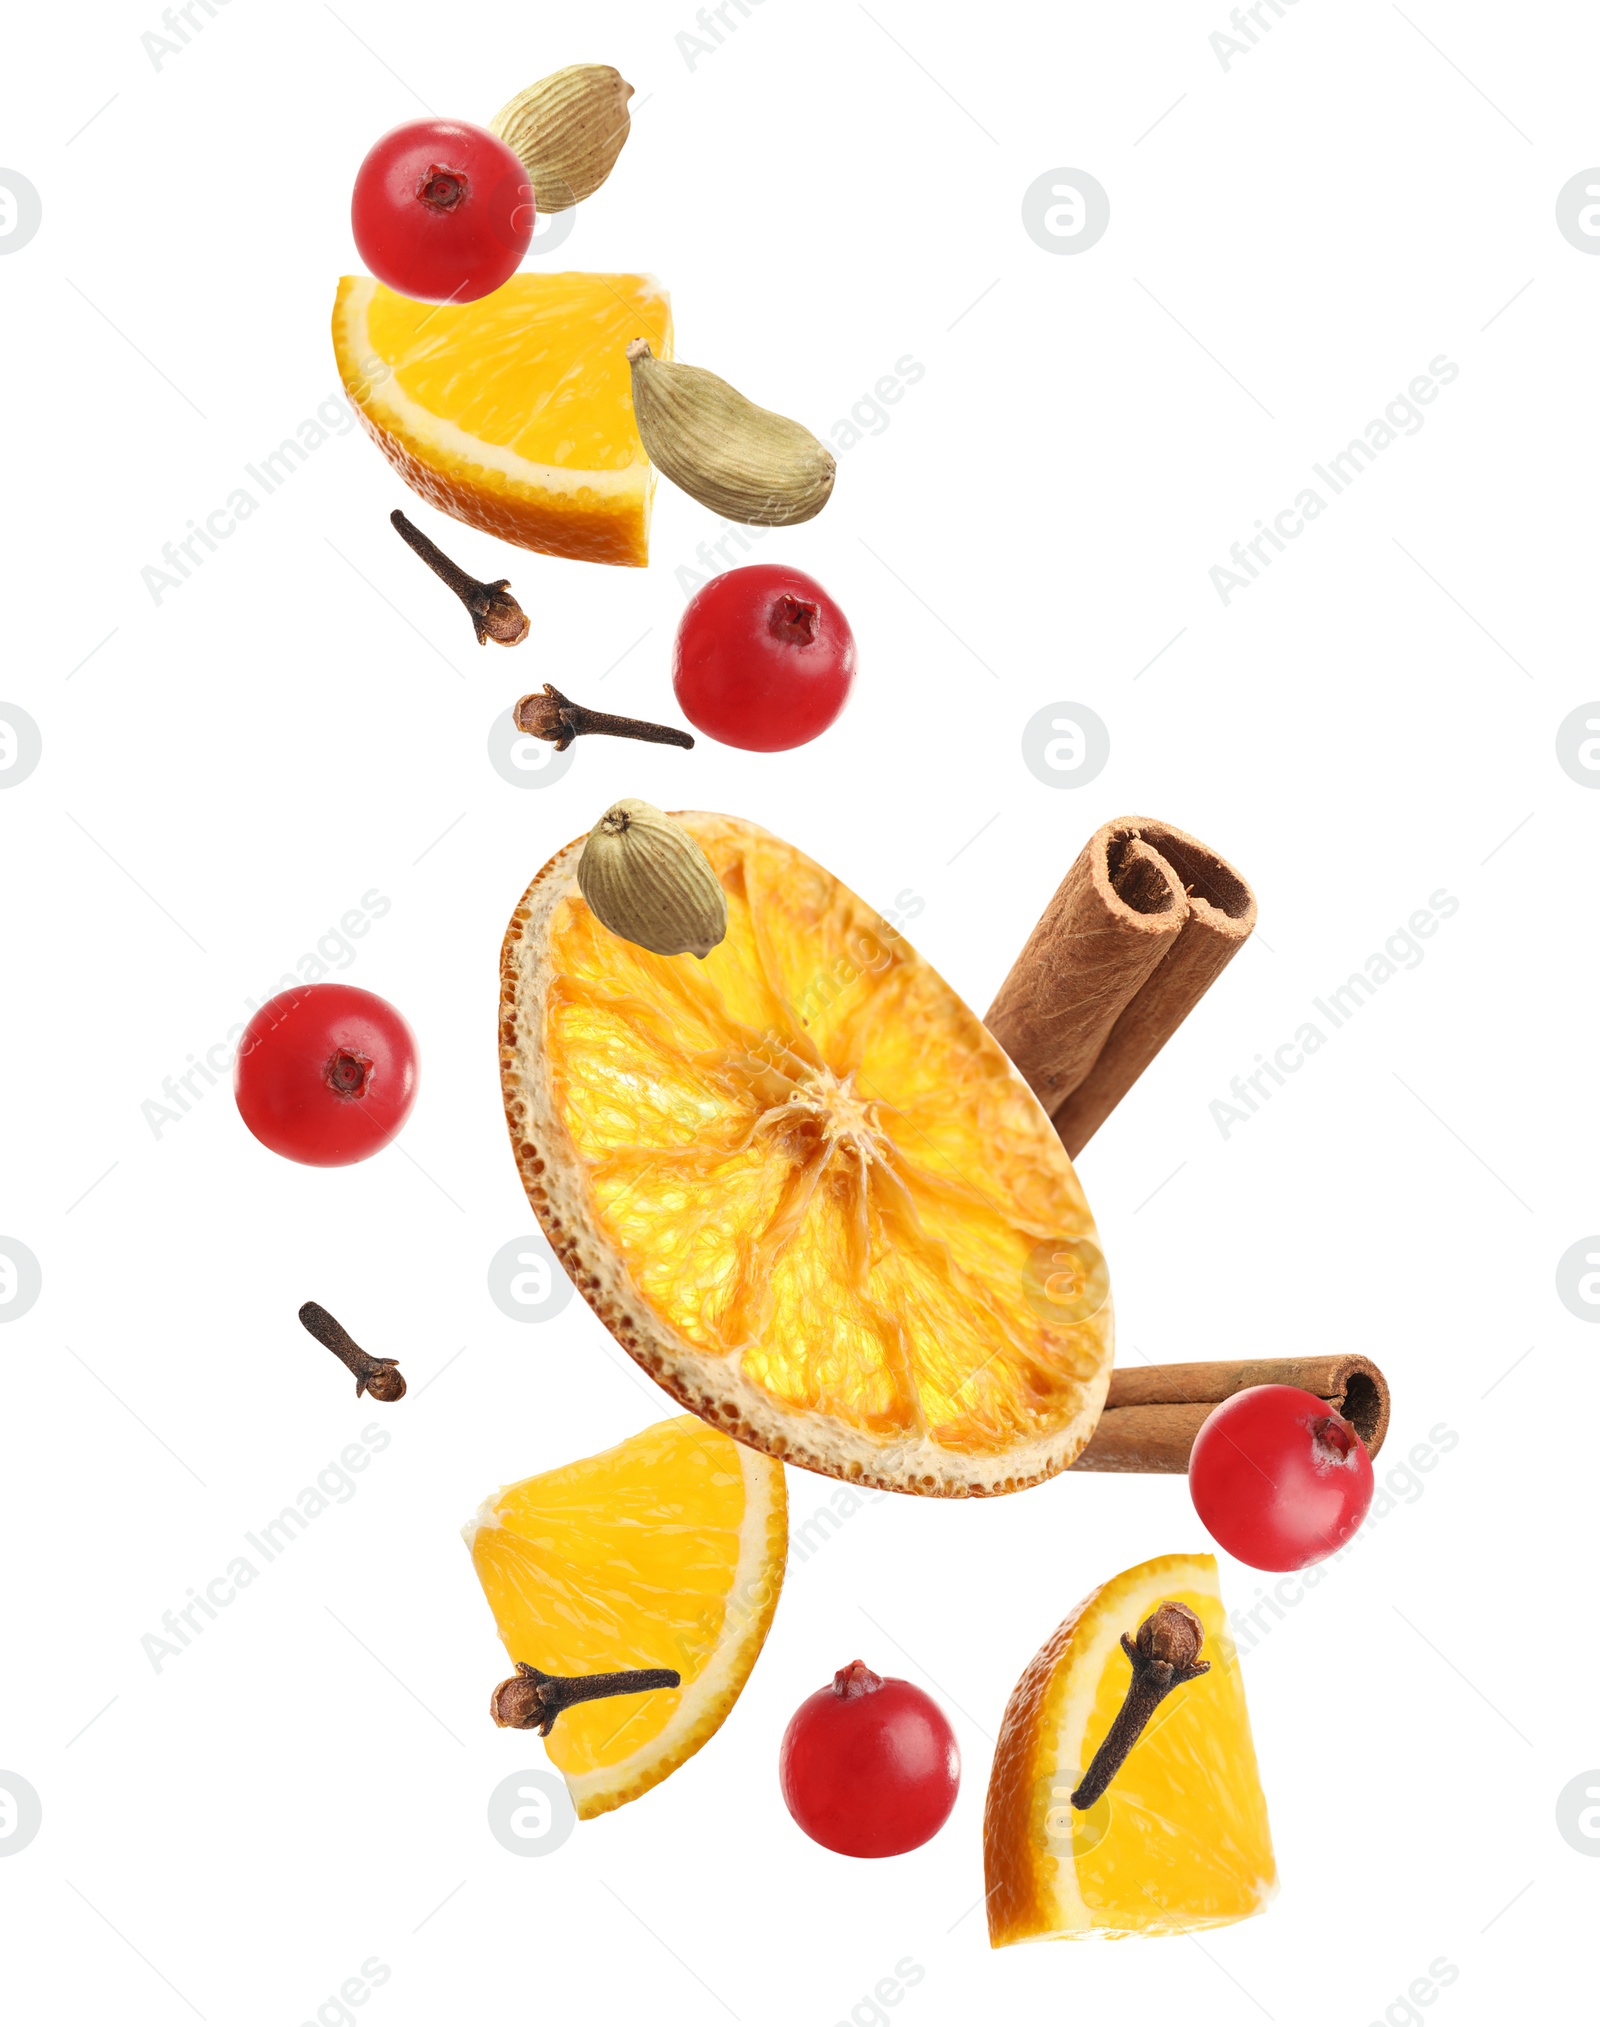 Image of Cut orange, cranberries and different spices falling on white background. Mulled wine ingredients